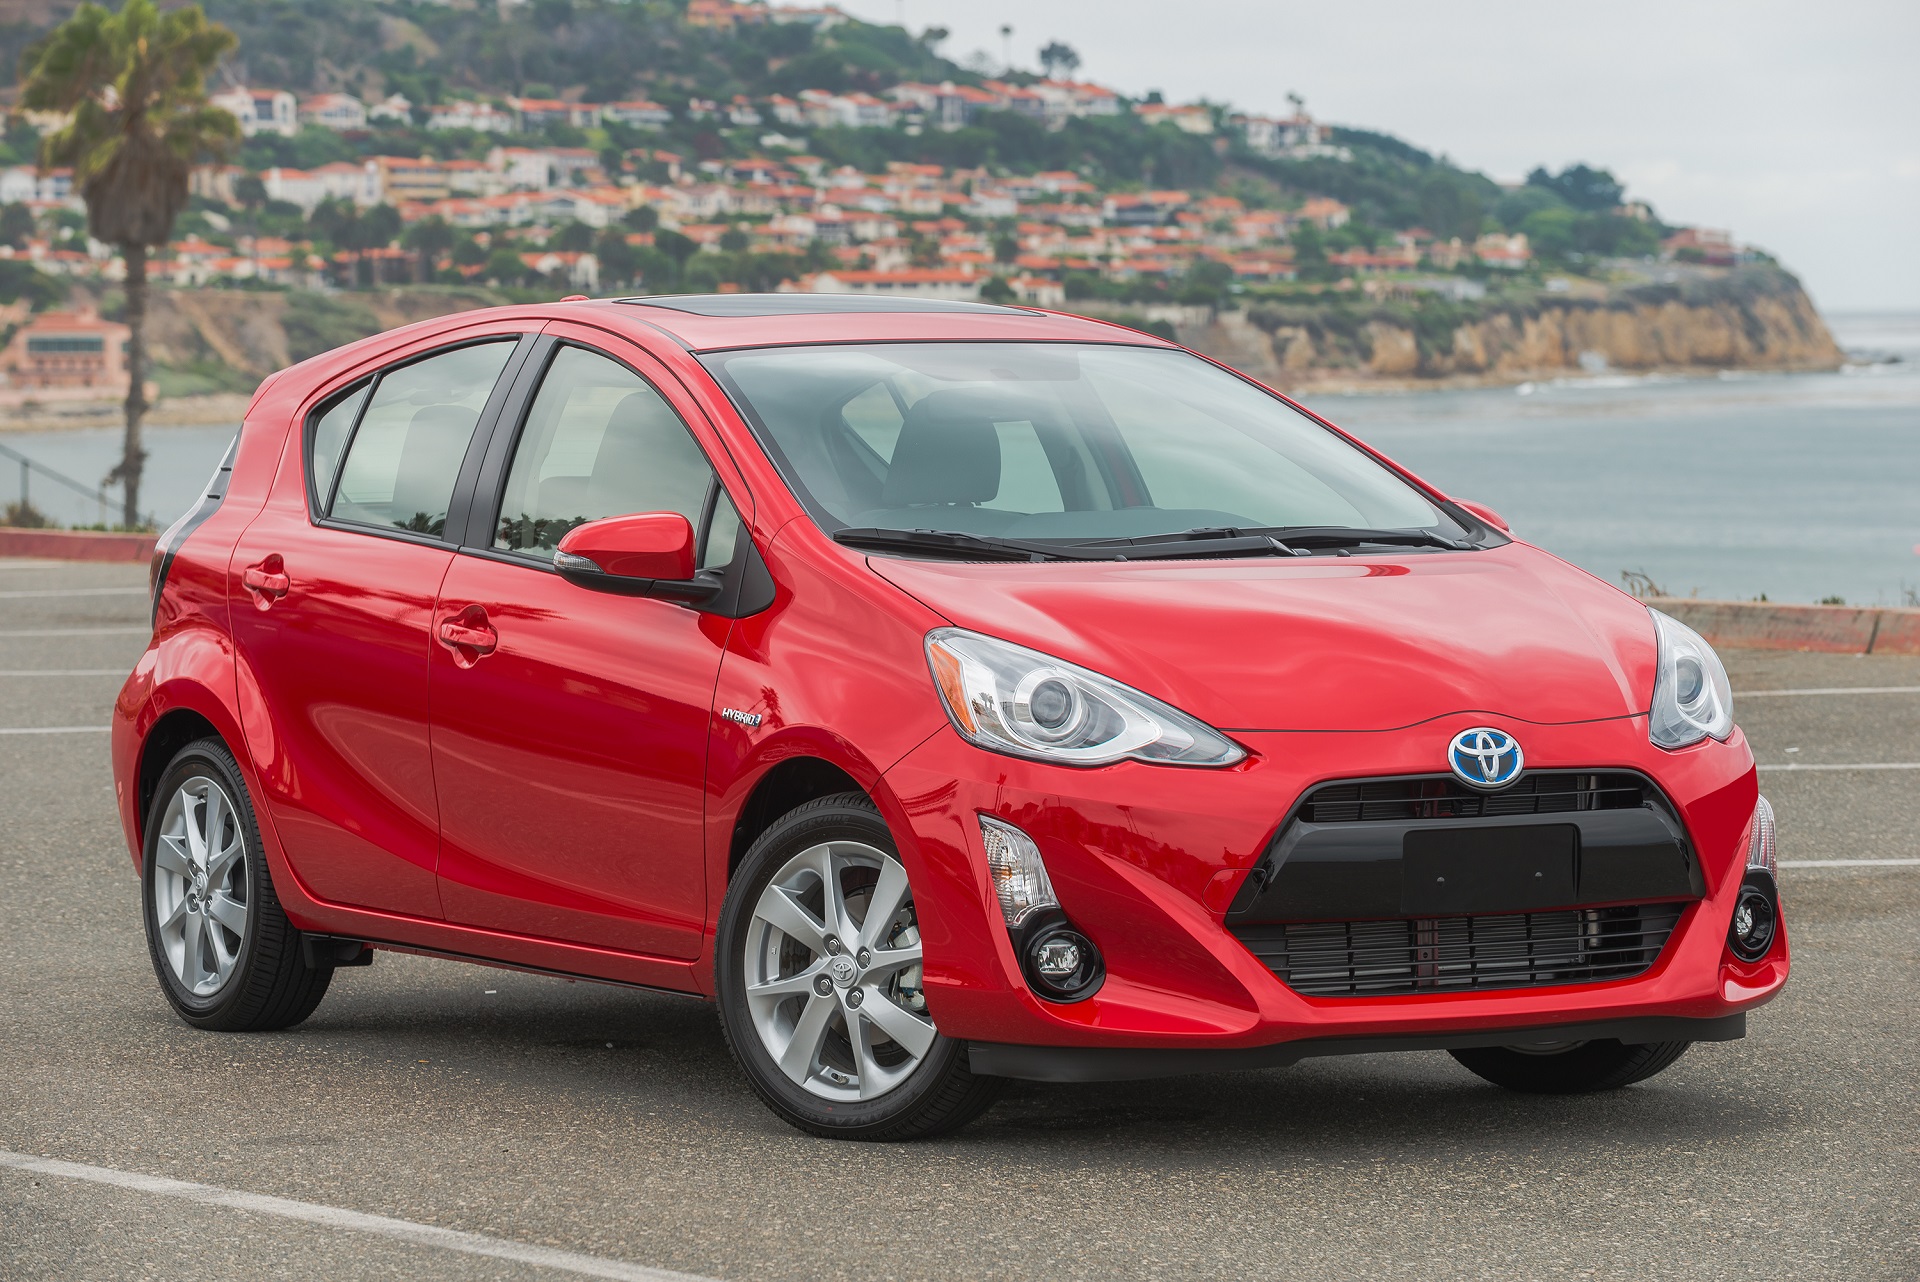 Cheapest Hybrid Cars in the World-Toyota Prius C Hybrid